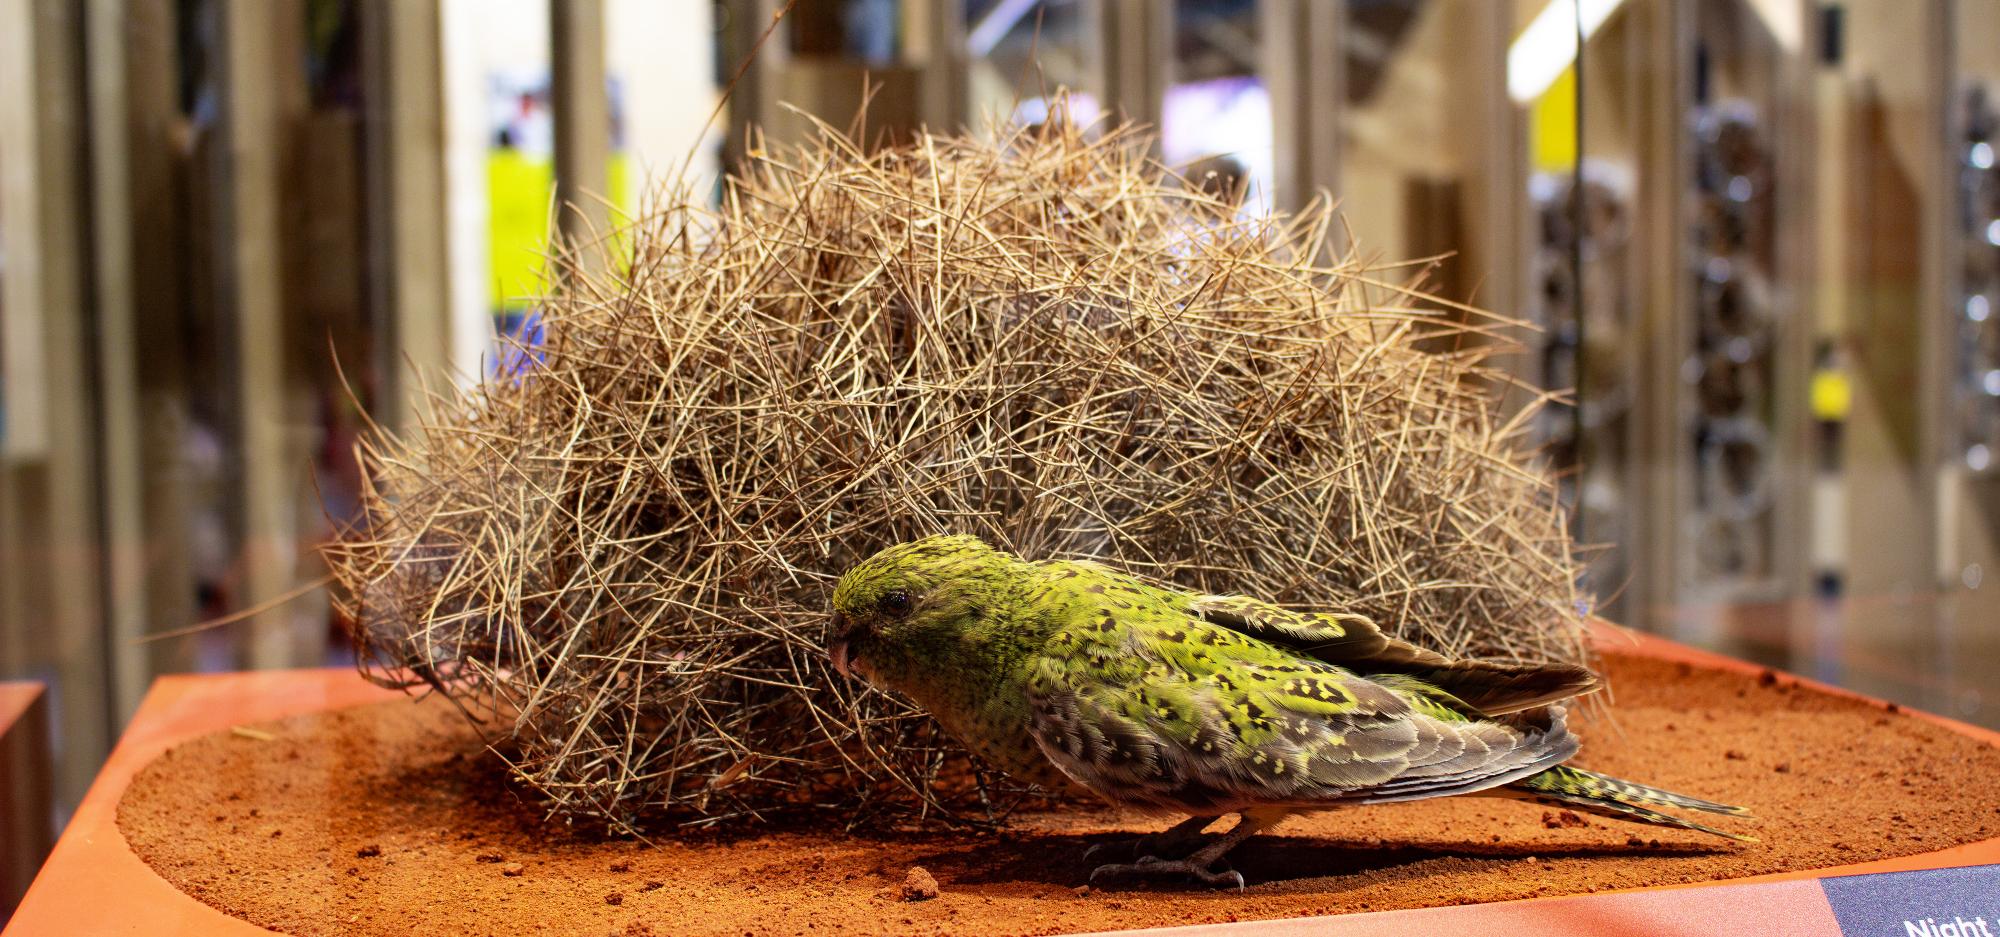 A taxidermy night parrot specimen in a showcase at the WA Museum. It has vivid green and yellow feathers with brown detailing and sits on red sand in front of a bush of spinifex